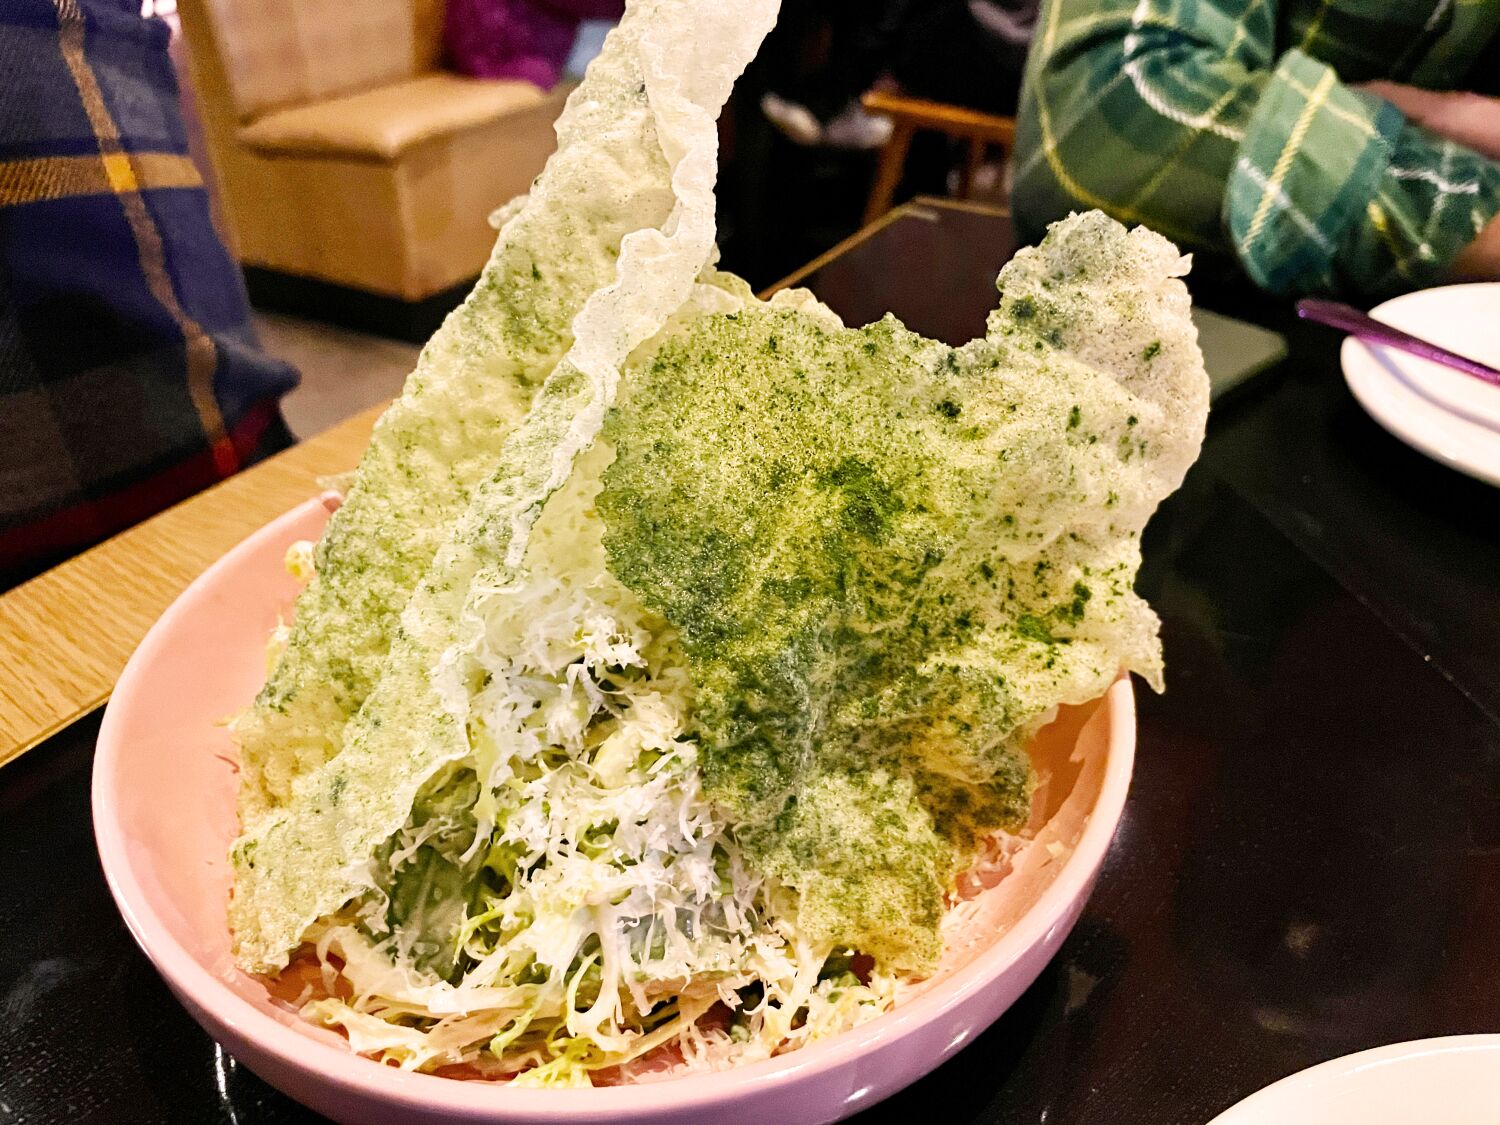 You've never seen a Caesar salad like this before